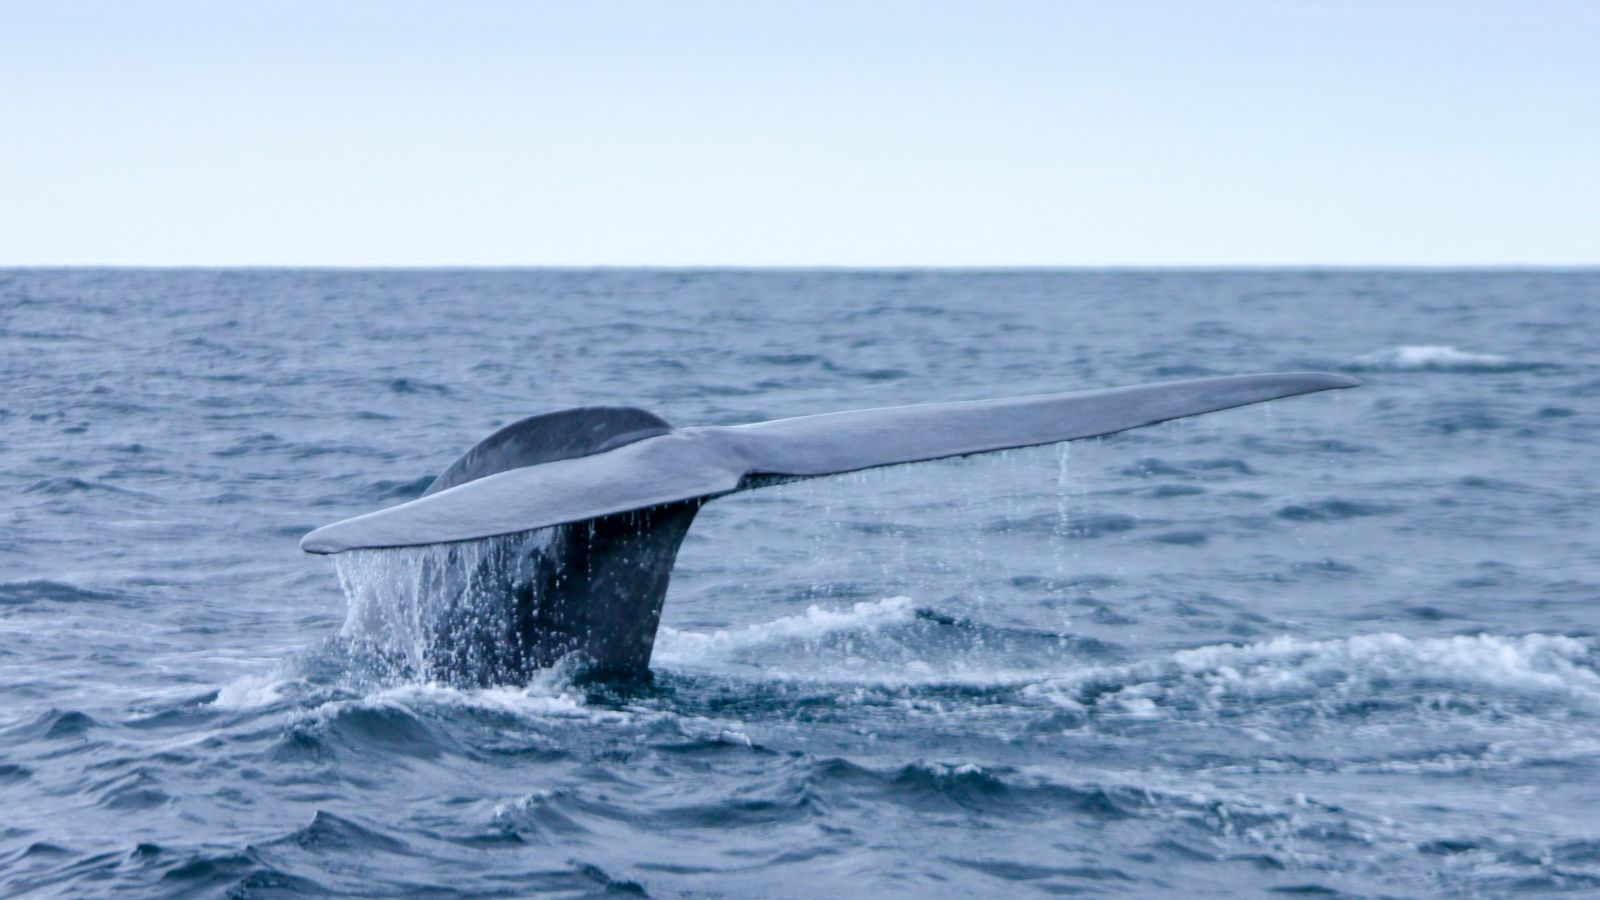 <p>The Azores has four resident species: Sperm Whale, Common Dolphin, Bottlenose Dolphin, and Risso’s Dolphin. Besides them, more than 20 species migrate along its shoreline. </p><p>Blue, Fin, and Sei whales arrive around March and can be spotted up until July. Pilot Whales come a bit later, but stay longer as well, until October. However, the <a href="https://futurismo.pt/blog/whale-watching-in-azores-when-is-the-best-time/" rel="noreferrer noopener">best time to whale watching in the Azores</a> is during spring, when visitors have a chance to catch a glimpse of most of the species. </p>